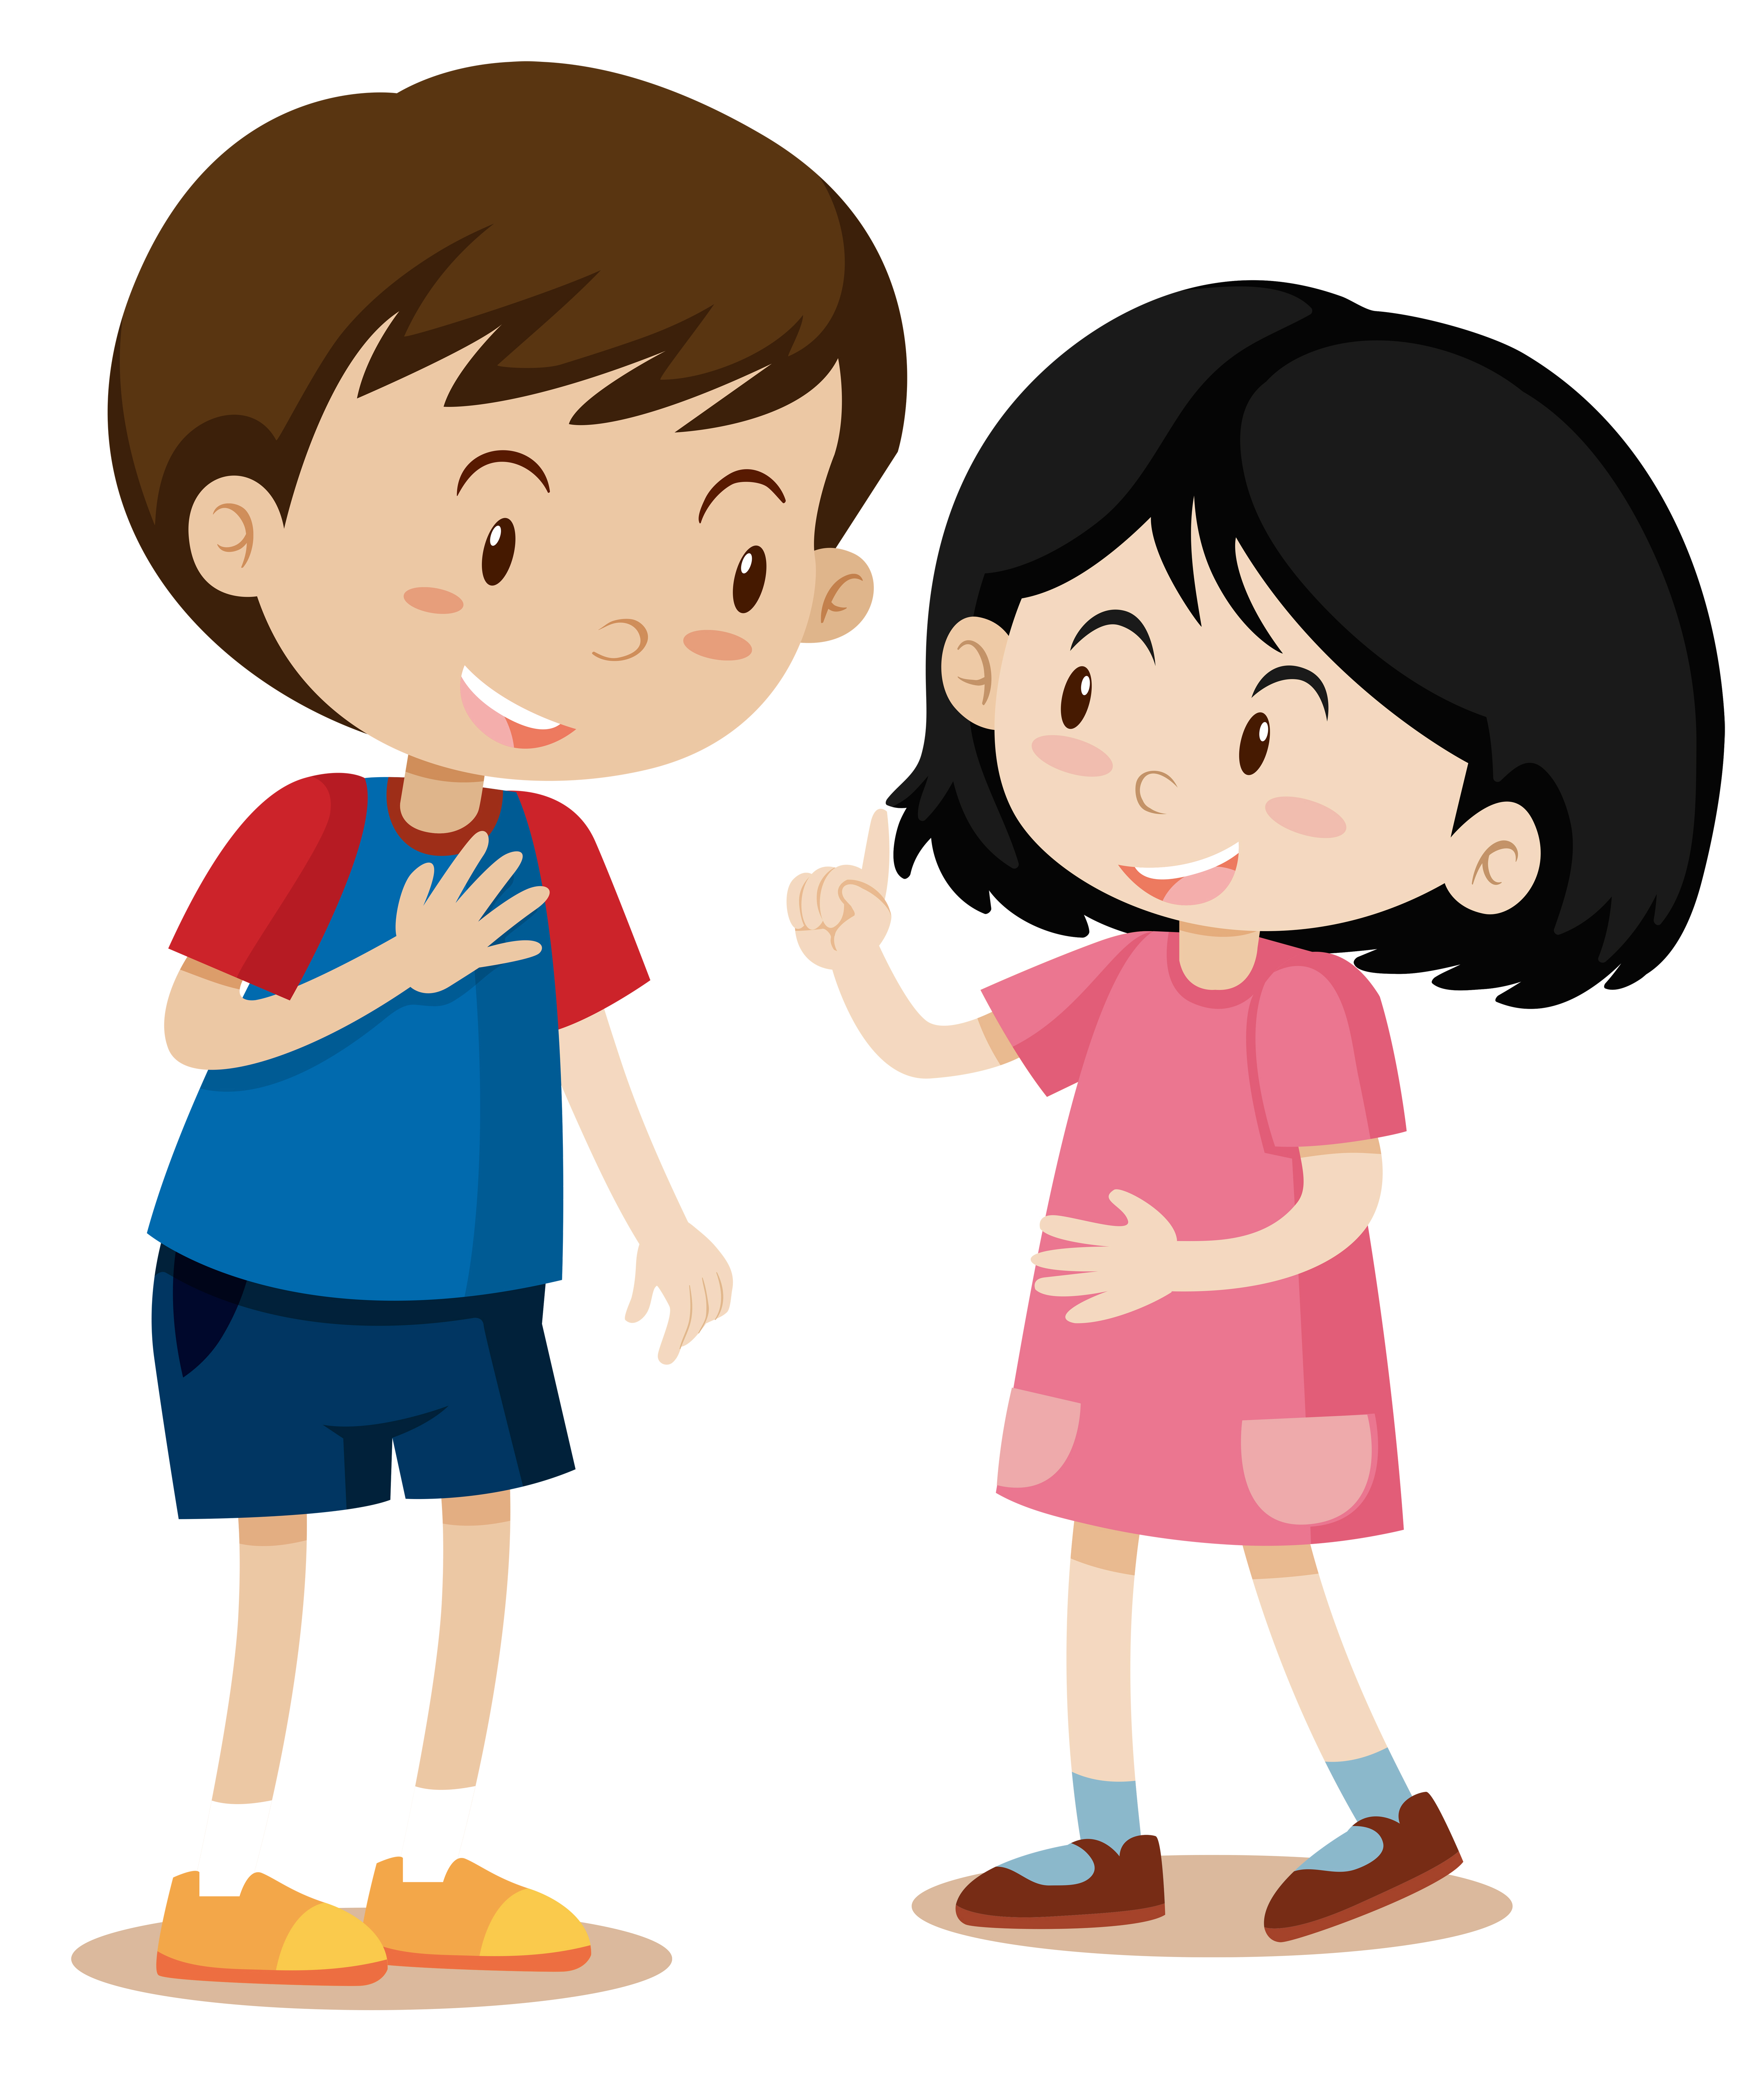 Young Boy And Girl Talking Download Free Vectors Clipart Graphics Vector Art